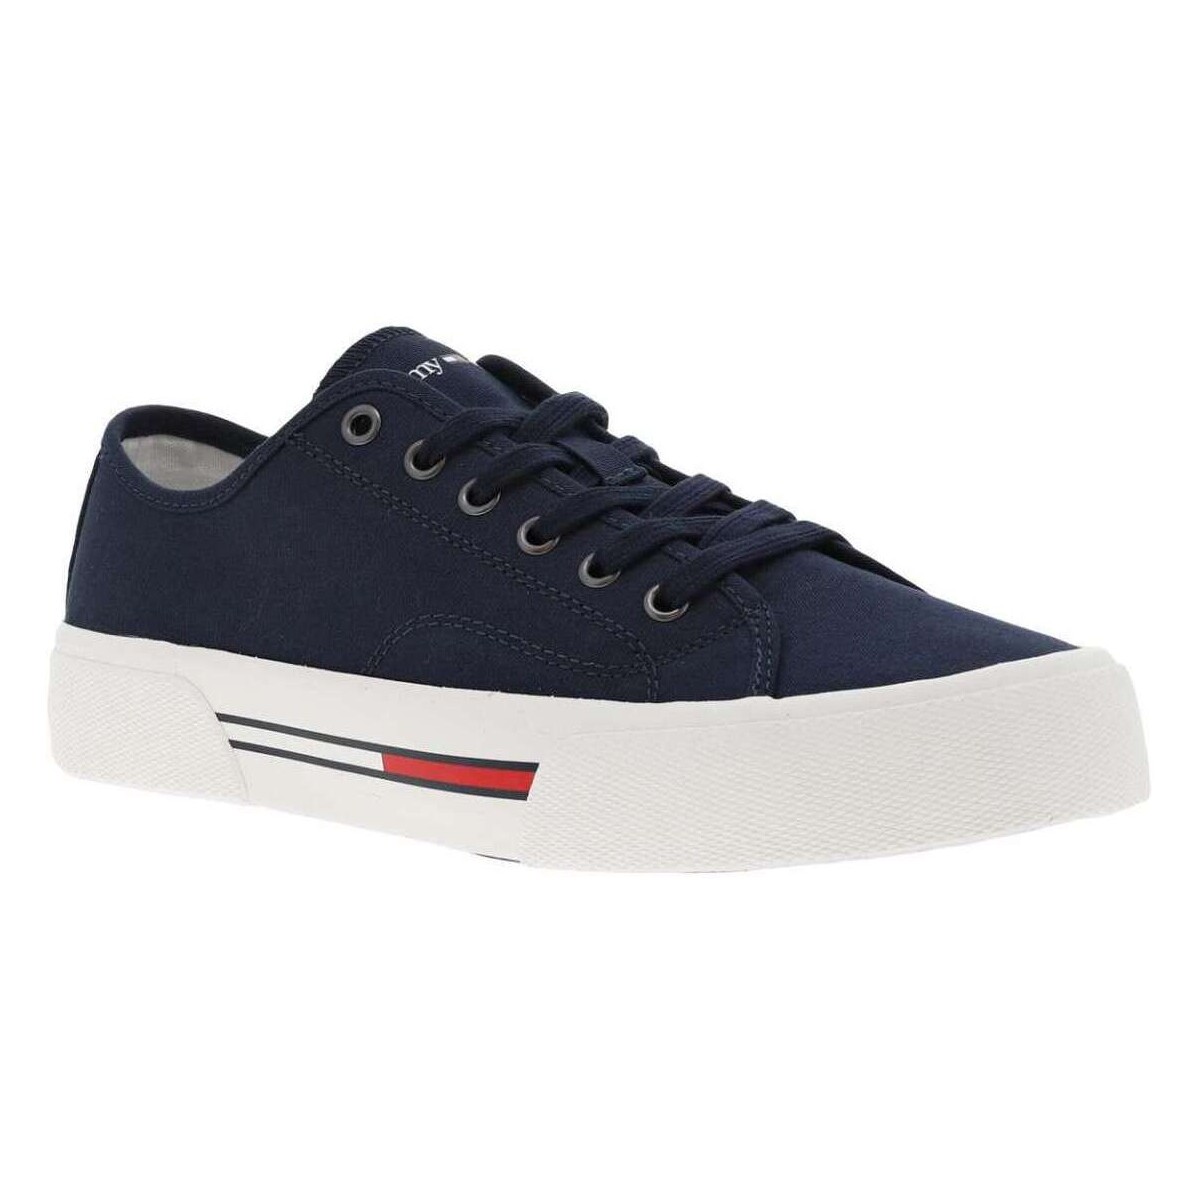 Chaussures Homme Baskets basses Tommy Jeans 20097CHAH23 Marine